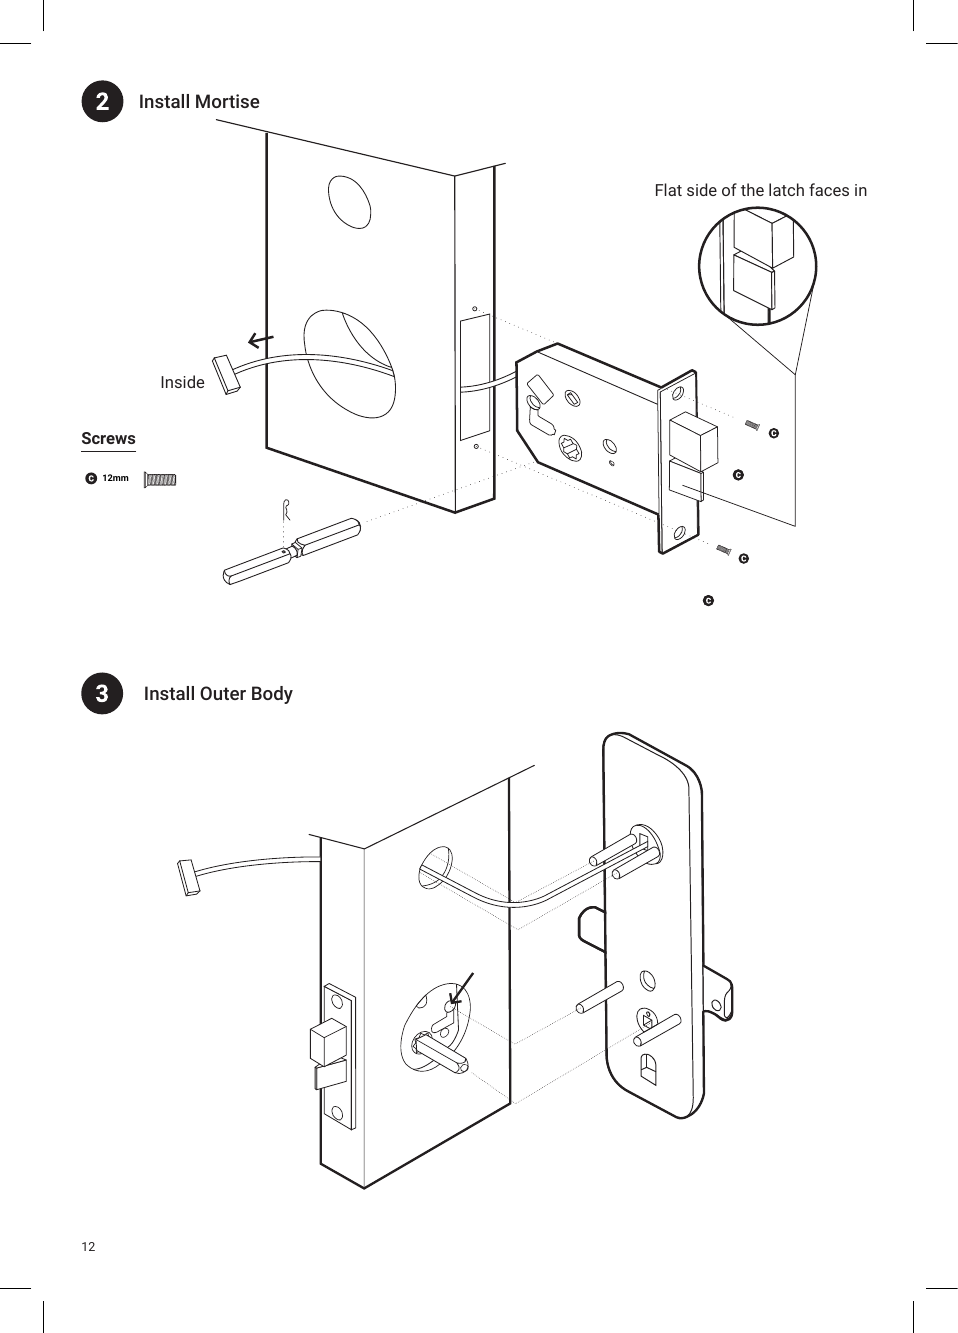 Install MortiseFlat side of the latch faces in InsideInstall Outer Body12Screws12mm